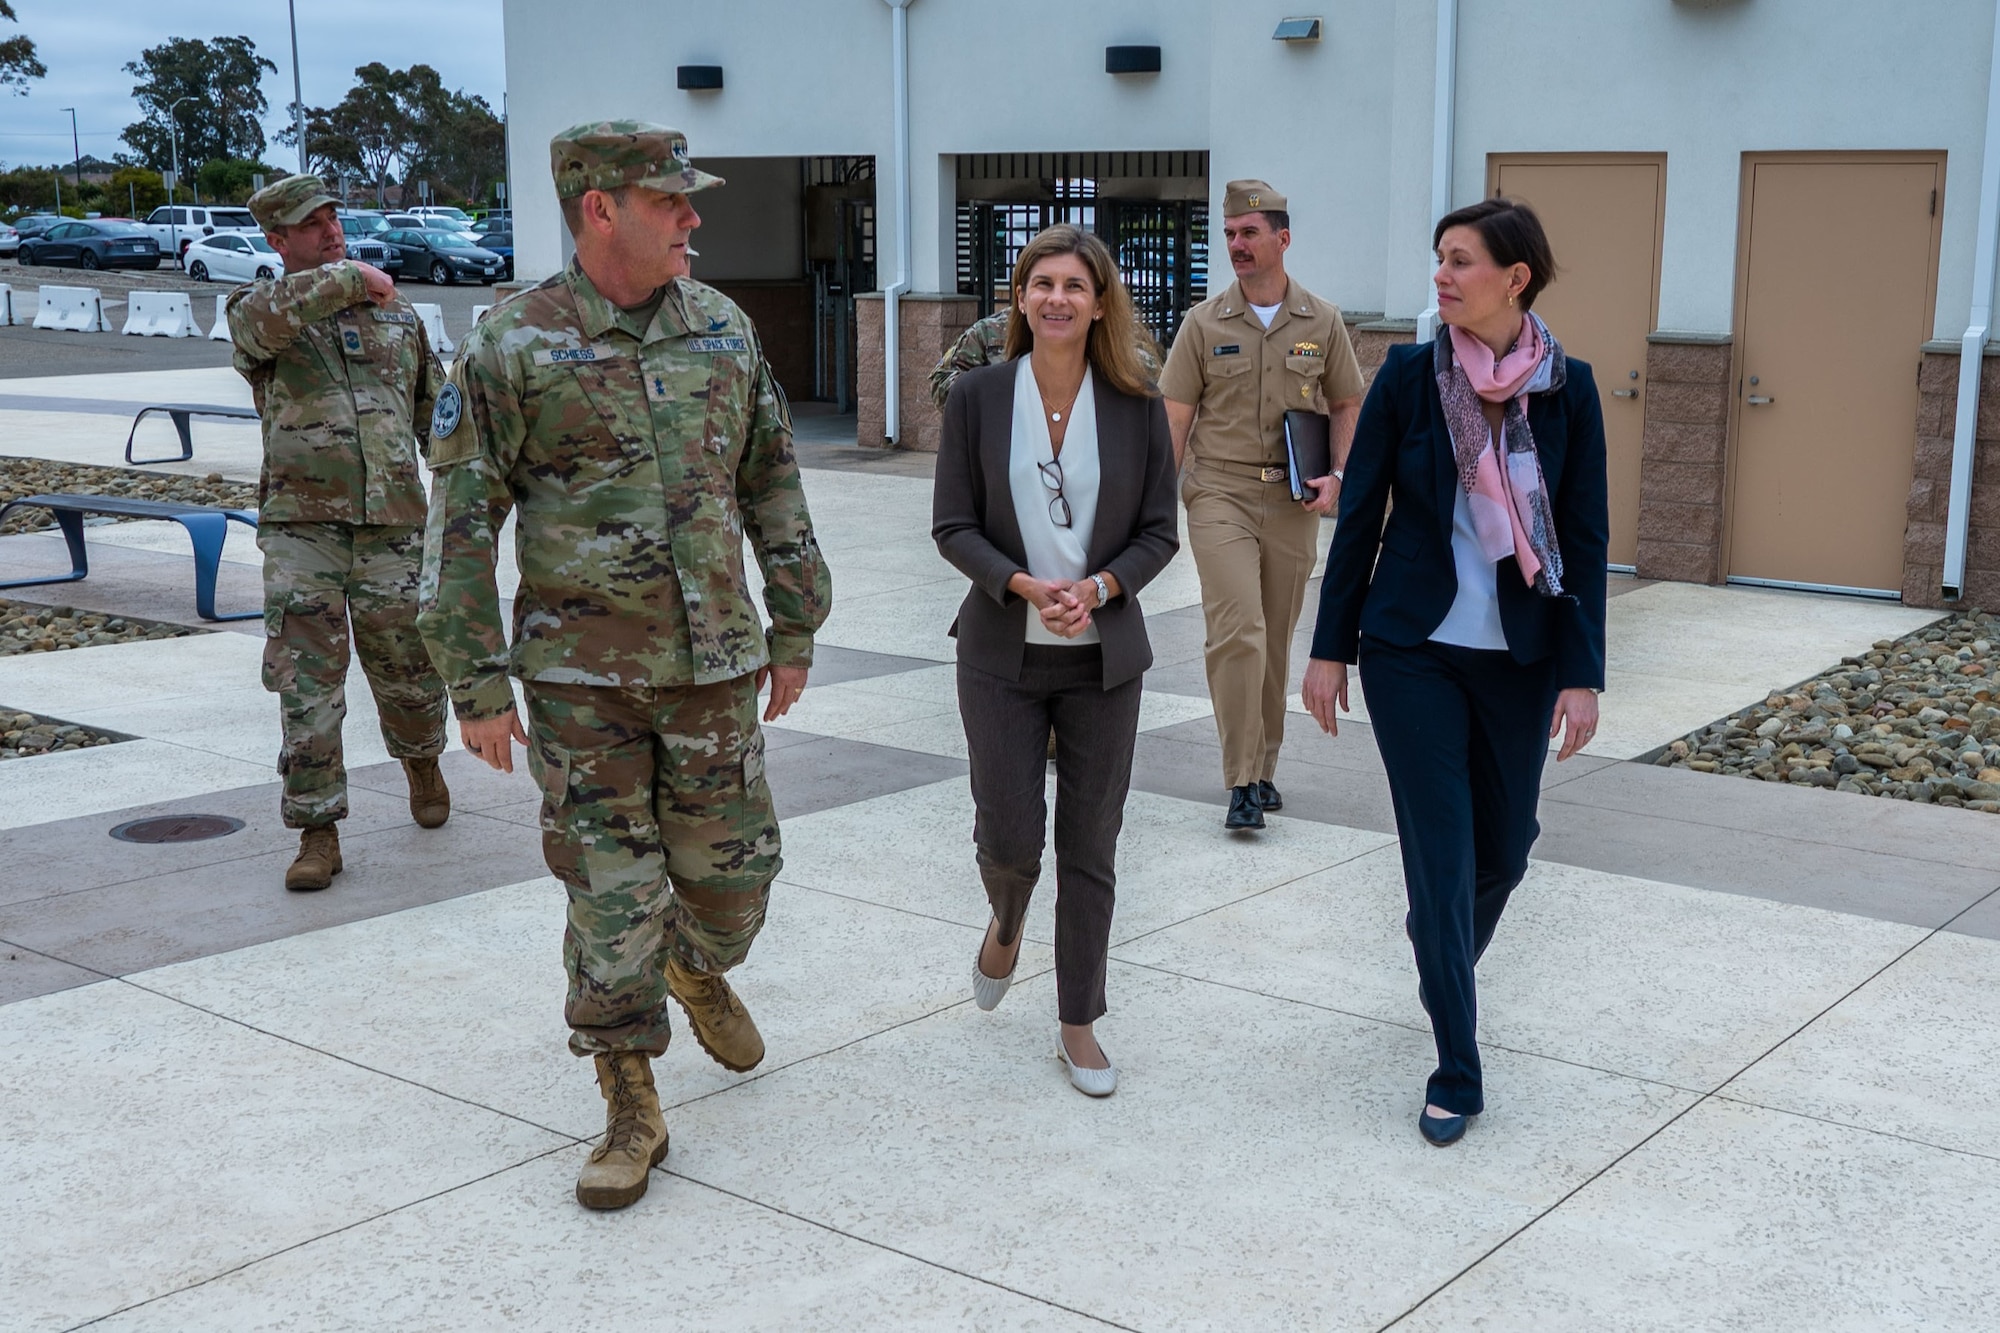 U.S. Space Force Chief Master Sgt. Grange S. Coffin, Combined Force Space Component Command (CFSCC) Senior Enlisted Leader, left, and Maj. Gen. Douglas A. Schiess, CFSCC commander, middle-left, walk with Ms. Katharine Kelley, Deputy of Space Operations for Human Capital, middle-right, and Ms. Stephanie Miller, Deputy Assistant Secretary of Defense for Military Personnel Policy, right, at the CFSCC Headquarters on Vandenberg Space Force Base, Calif., June 27, 2023. (U.S. Space Force photo by Tech. Sgt. Luke Kitterman)